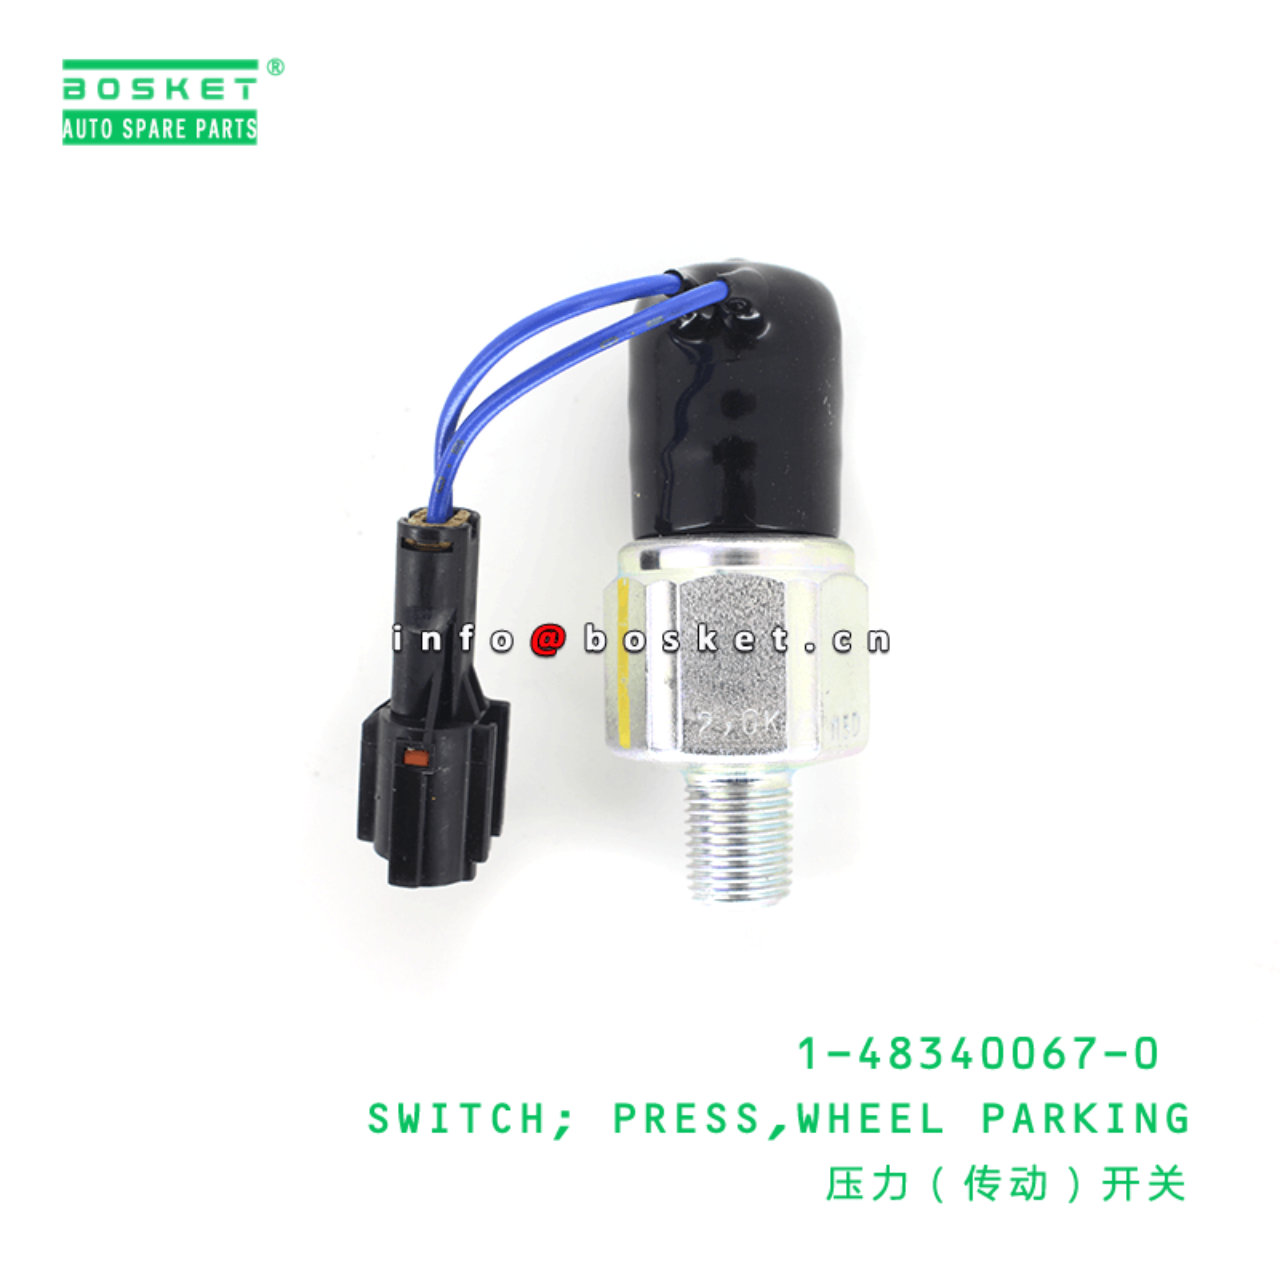 1483400670 1-48340067-0 Wheel Parking Press Switch Suitable for 